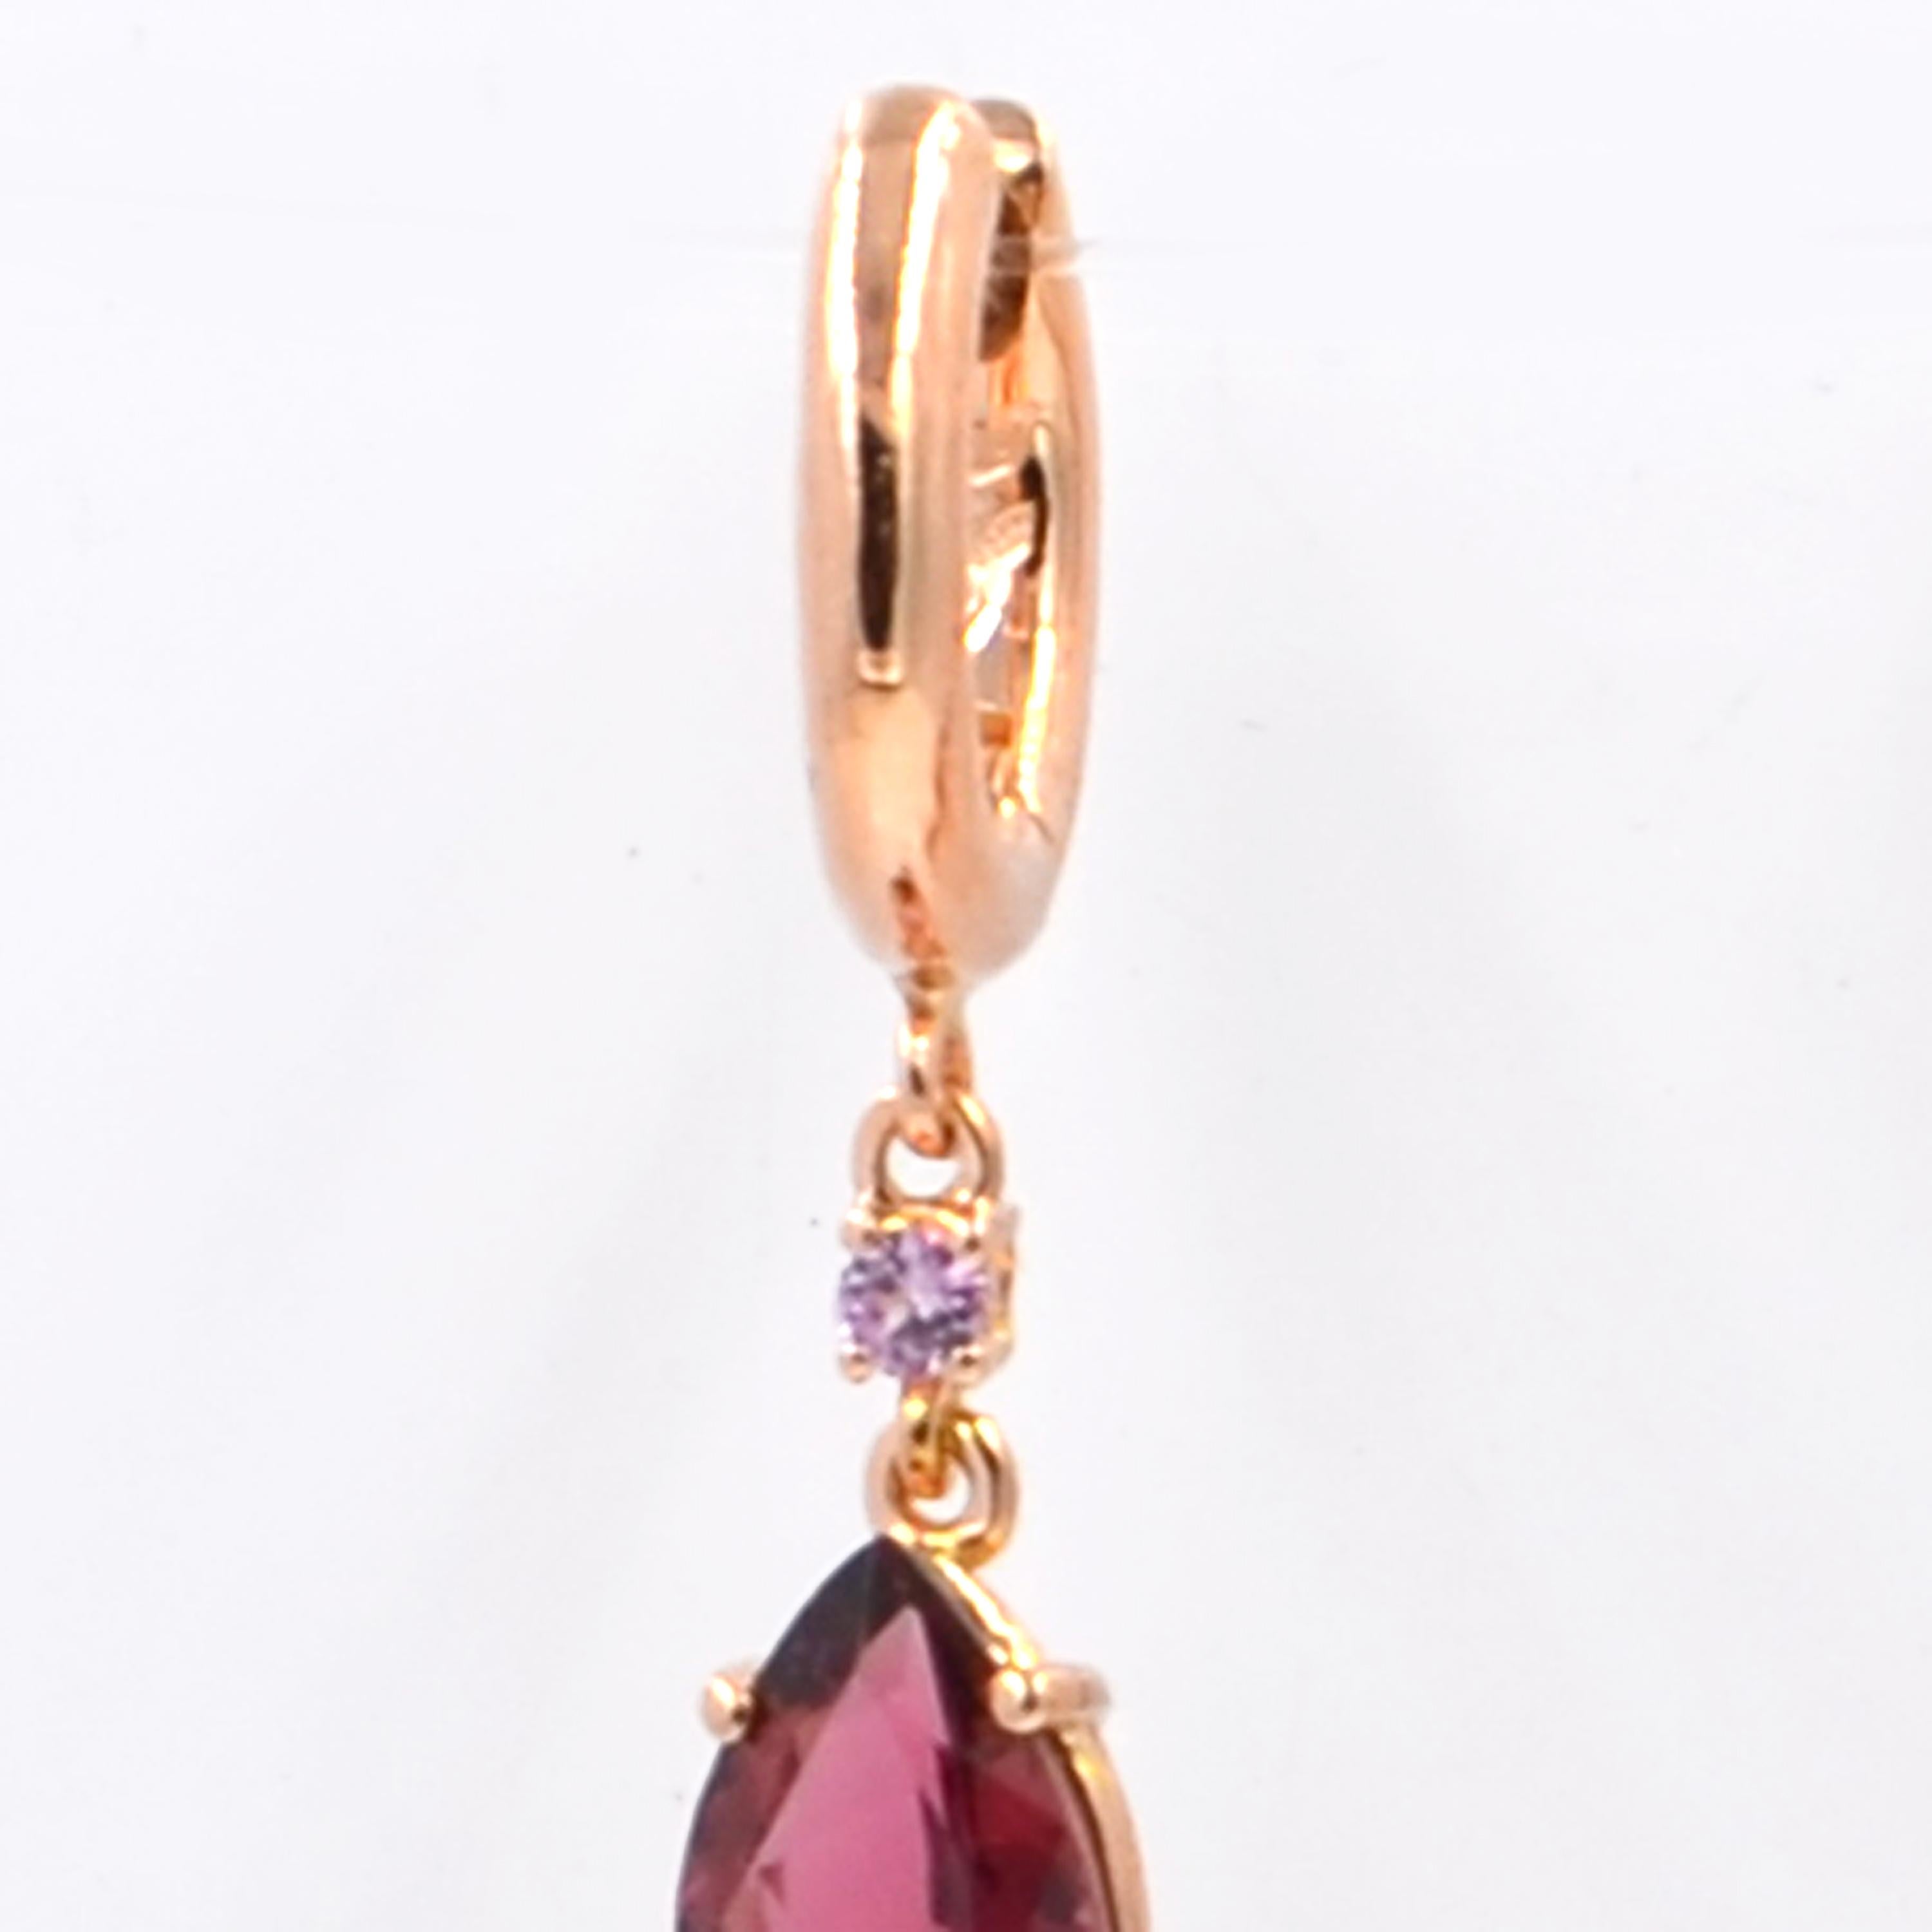 18KT Rose Gold great quality and color pink tourmalines drops with pink sapphires, made in Italy by GARAVELLI 
Earrings Lenght  mm.28
18 KT GOLD gr : 4,30
PINK SAPPHIRES  : 0,12
PINK TOURMALINES DROPS. ct : 2,30 total, each one is mm 8x6 
